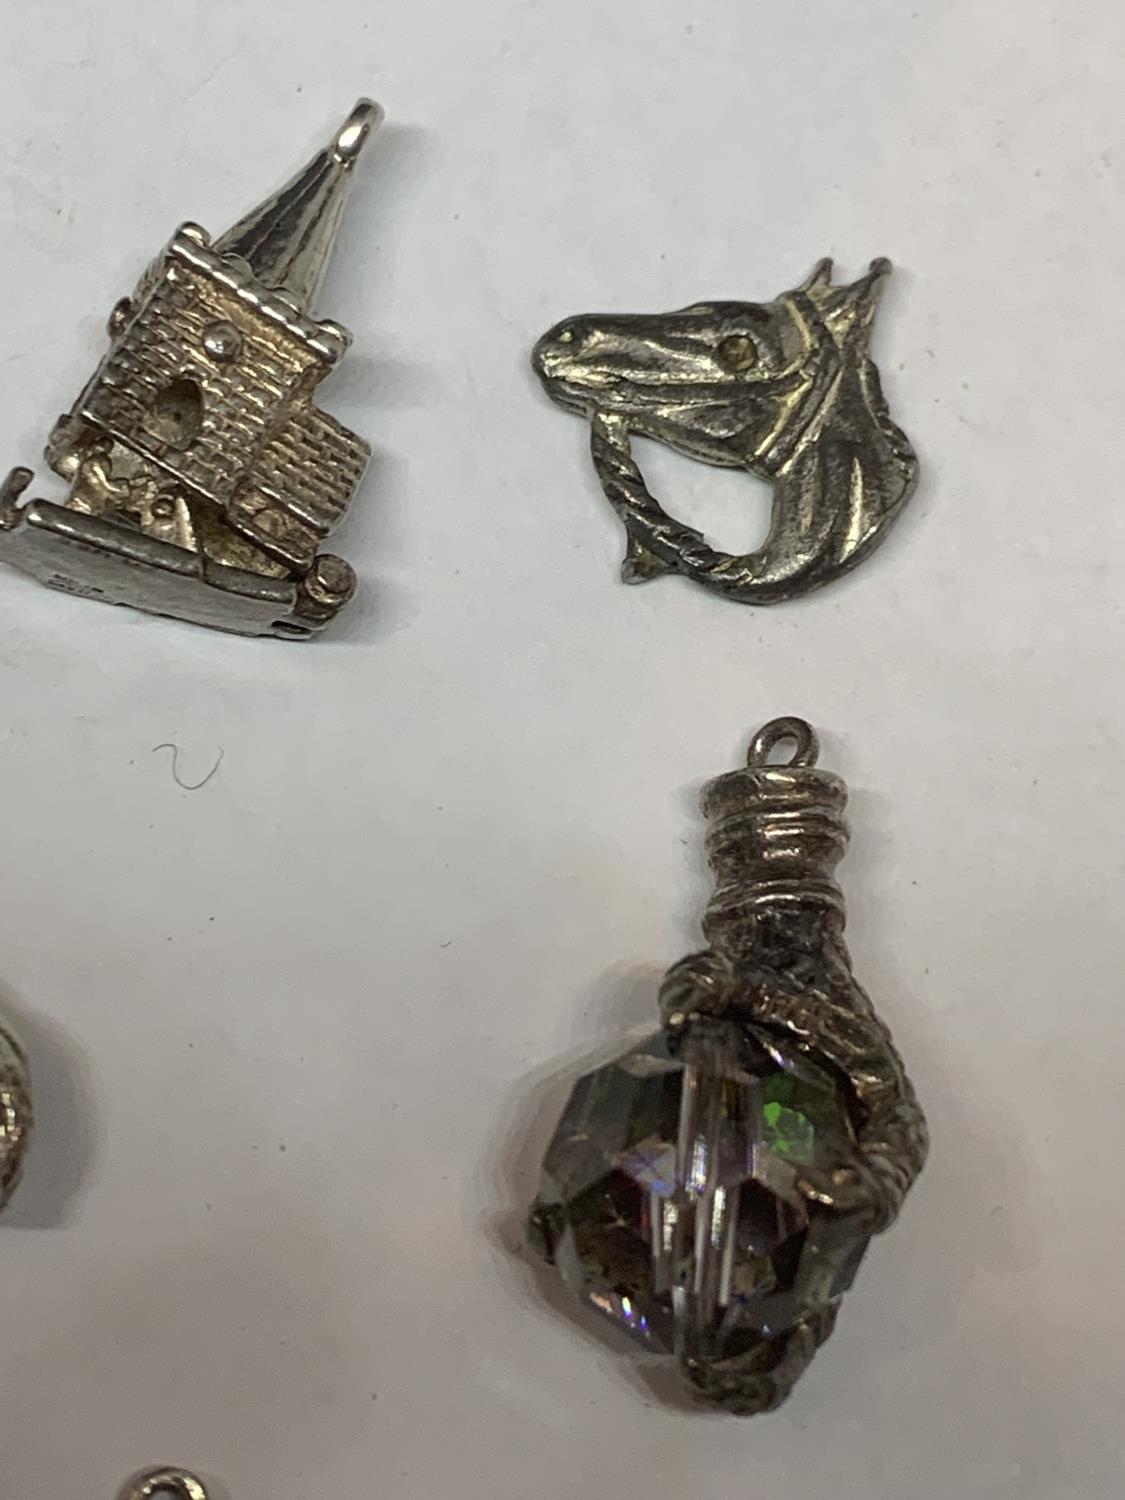 ELEVEN VARIOUS SILVER CHARMS TO INCLUDE HORSES, MOULIN ROUGE DANCER, DOG, TRAIN CHURCH ETC - Image 3 of 5